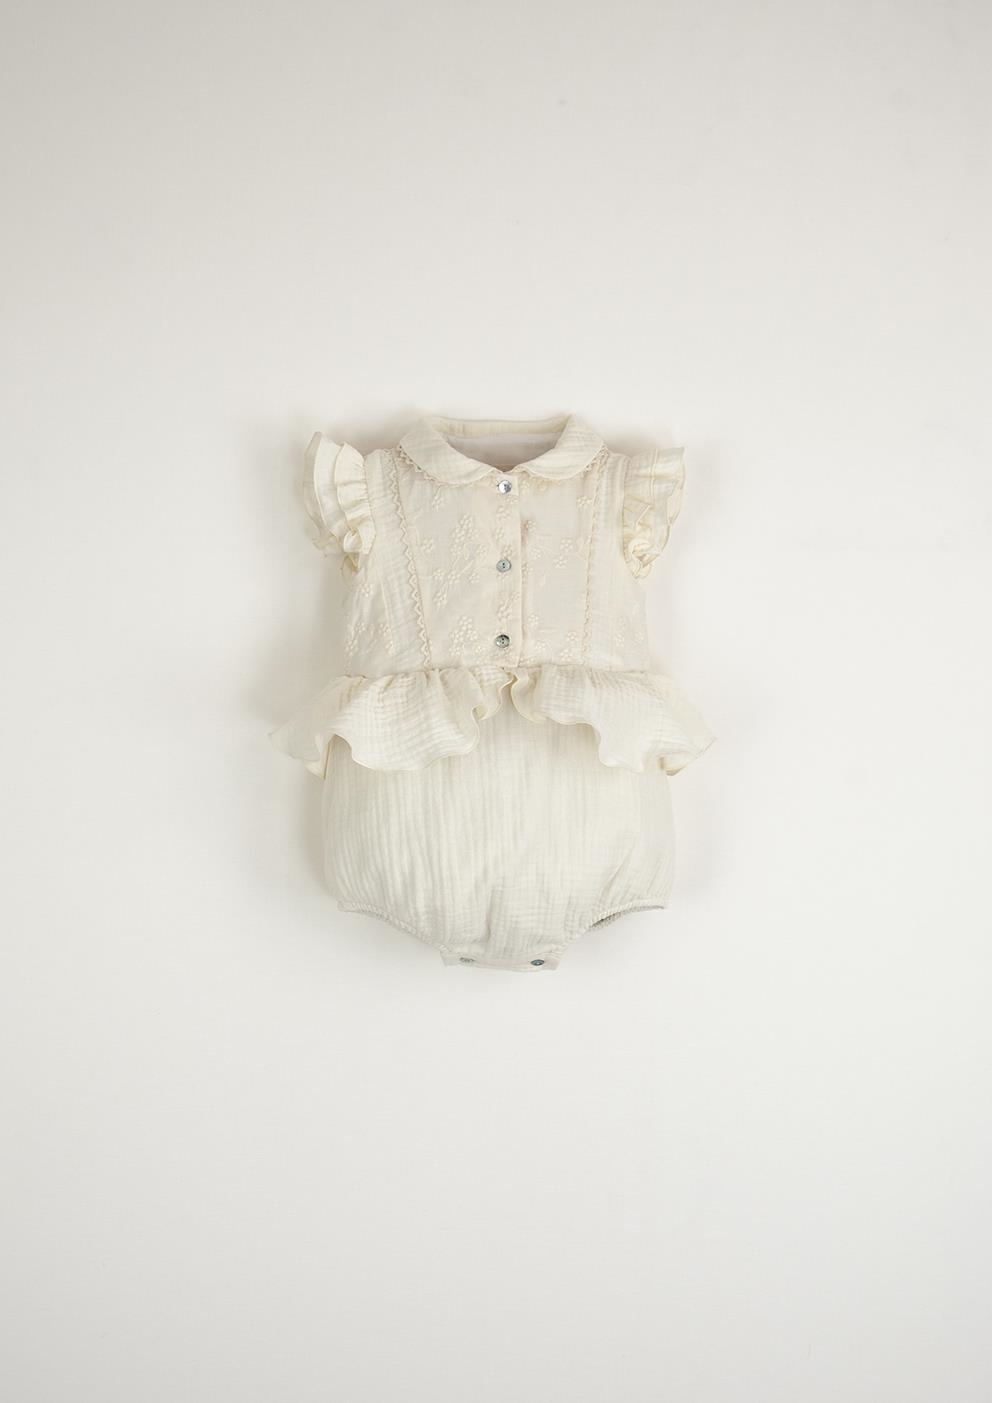 Mod.8.3 Organic off-white romper suit with collar | SS23 Mod.8.3 Organic off-white romper suit with collar